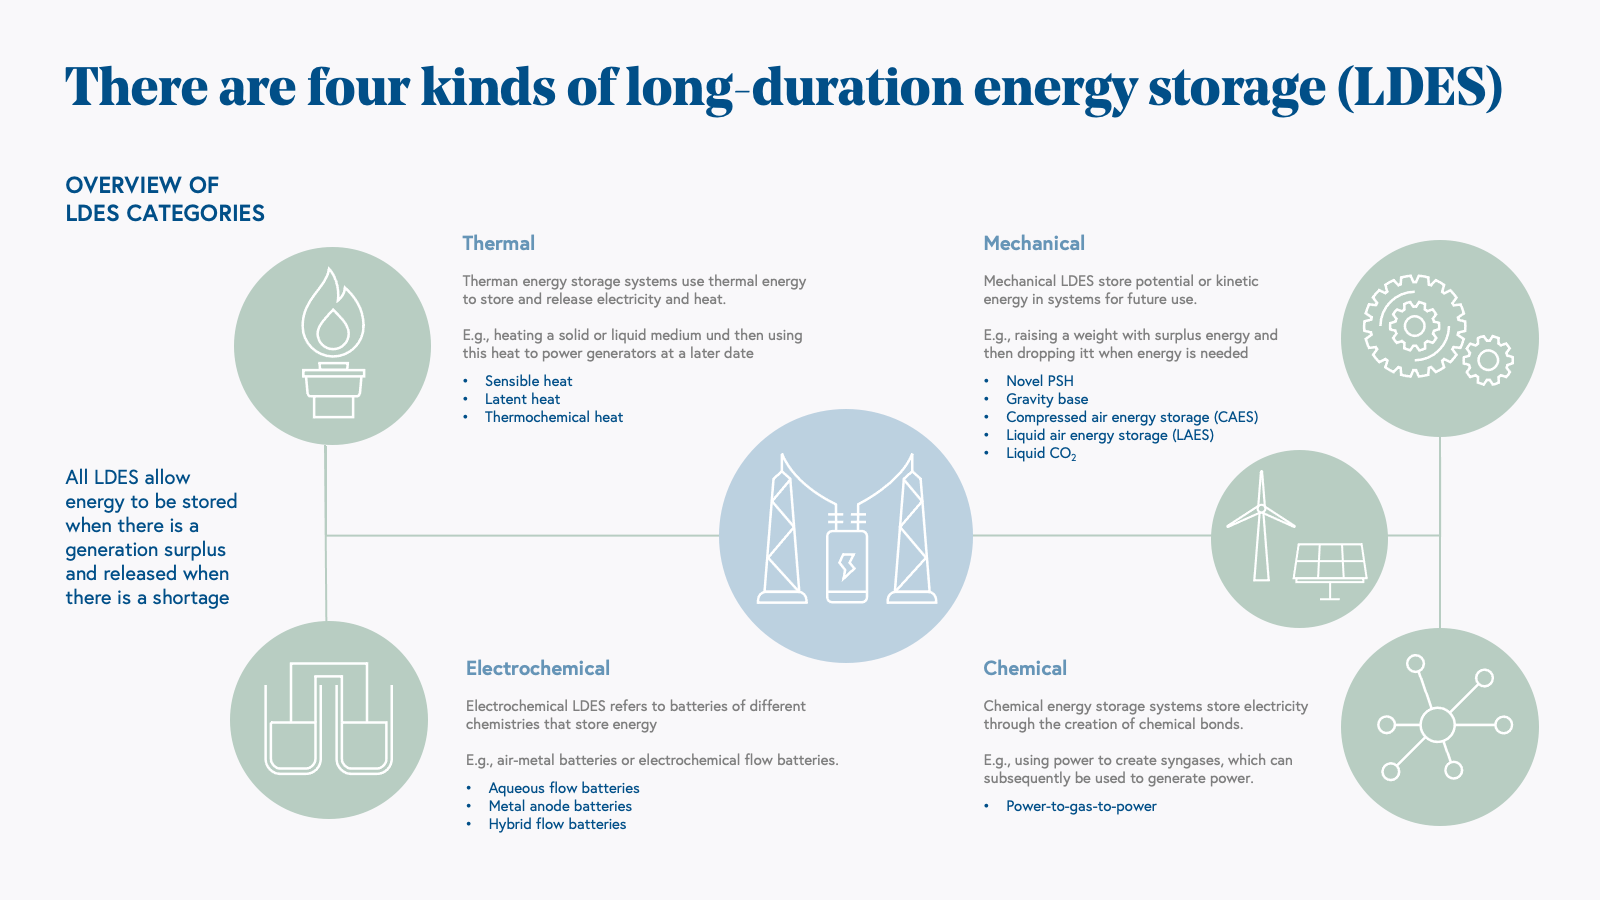 https://www.bvp.com/assets/uploads/2022/10/there_are_four_kinds_of_long_duration_energy_storage_ldes_atlas_image-min.png